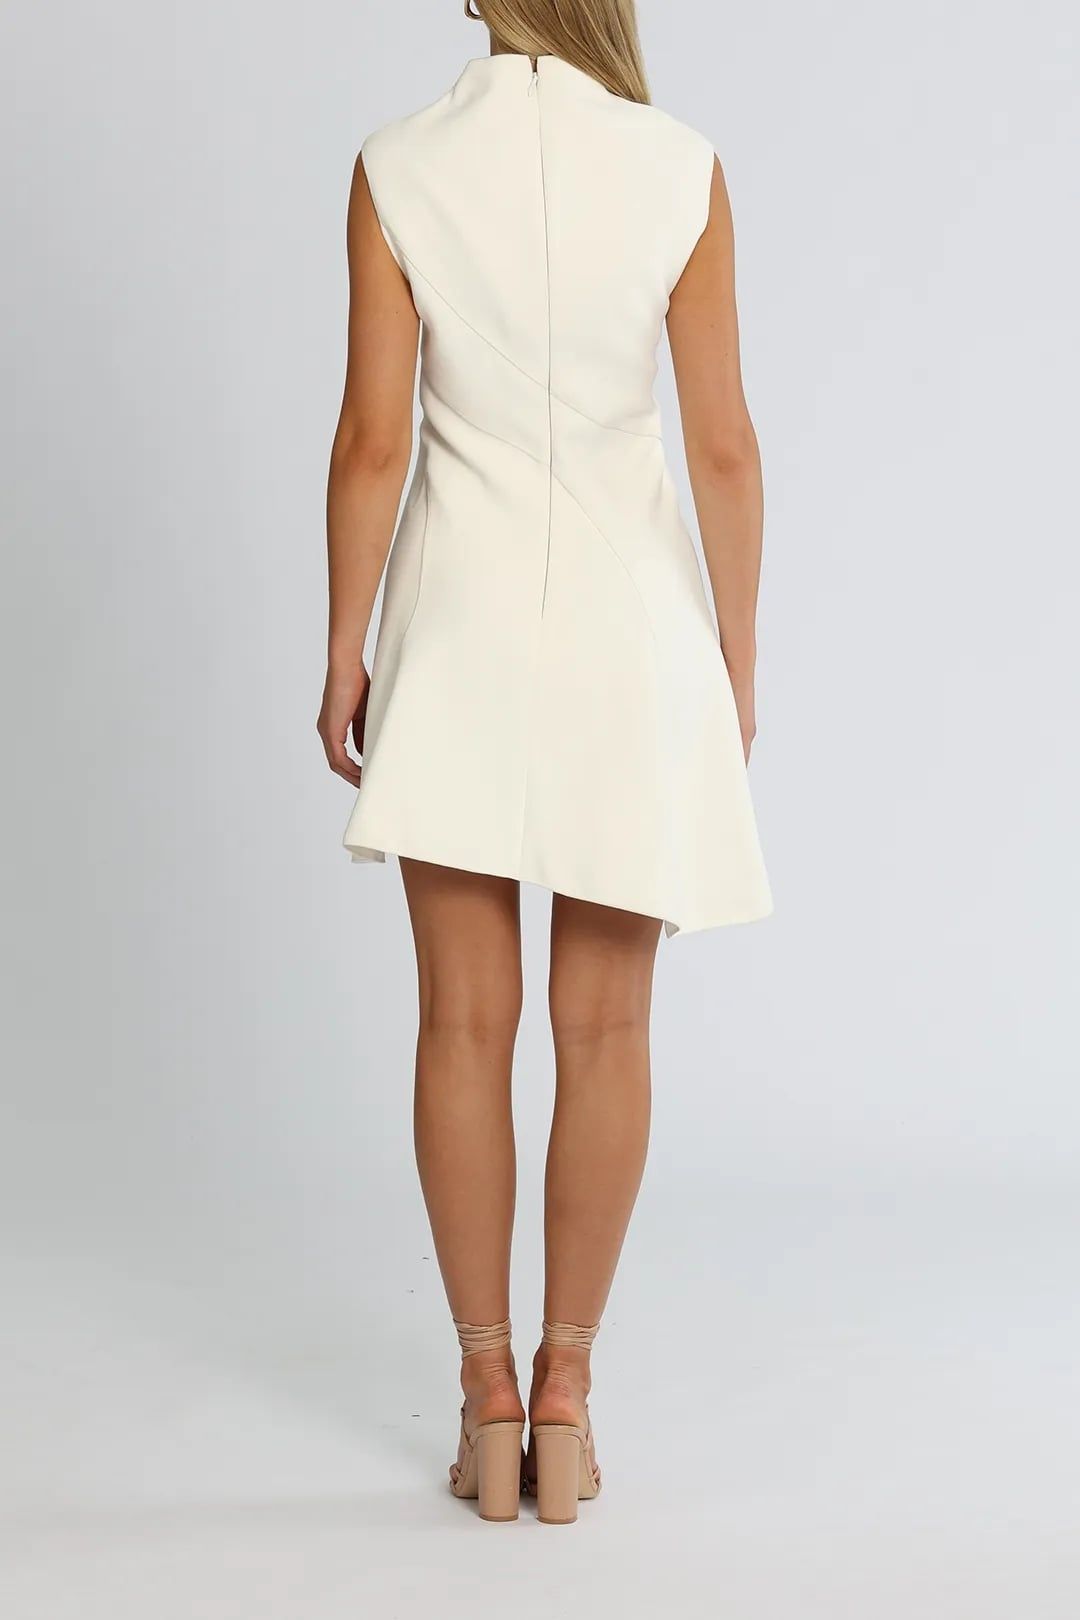 Acler Sinclair Dress in Ivory, ideal for formal events, rental option